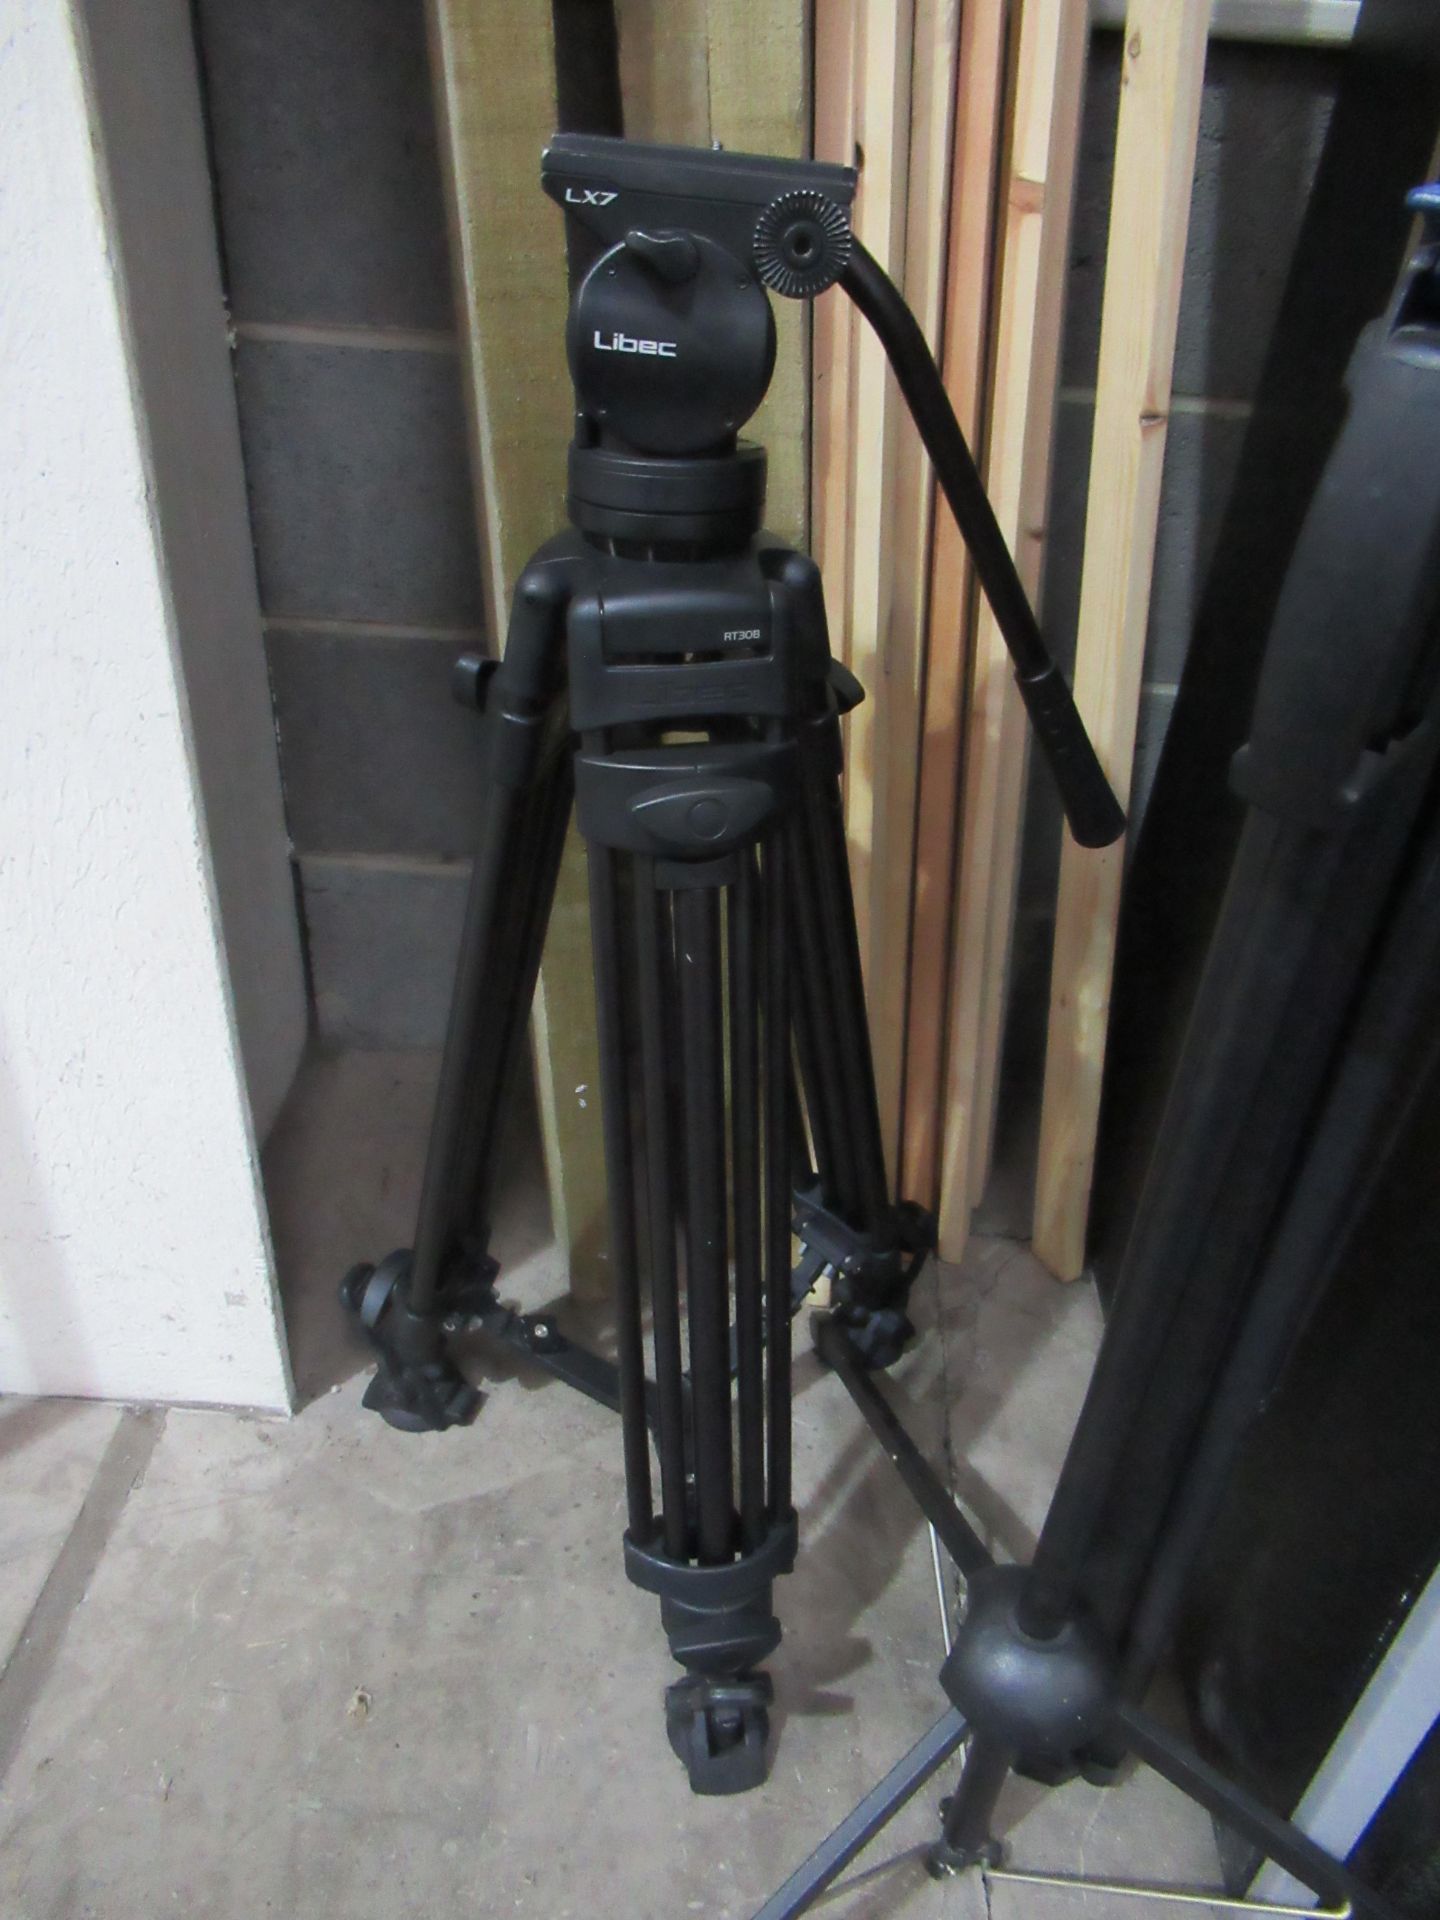 A Sony HDR-FX1E Handy Cam - no battery - Together with A Libec LX7 Tripod and Projection Screen - Image 9 of 11